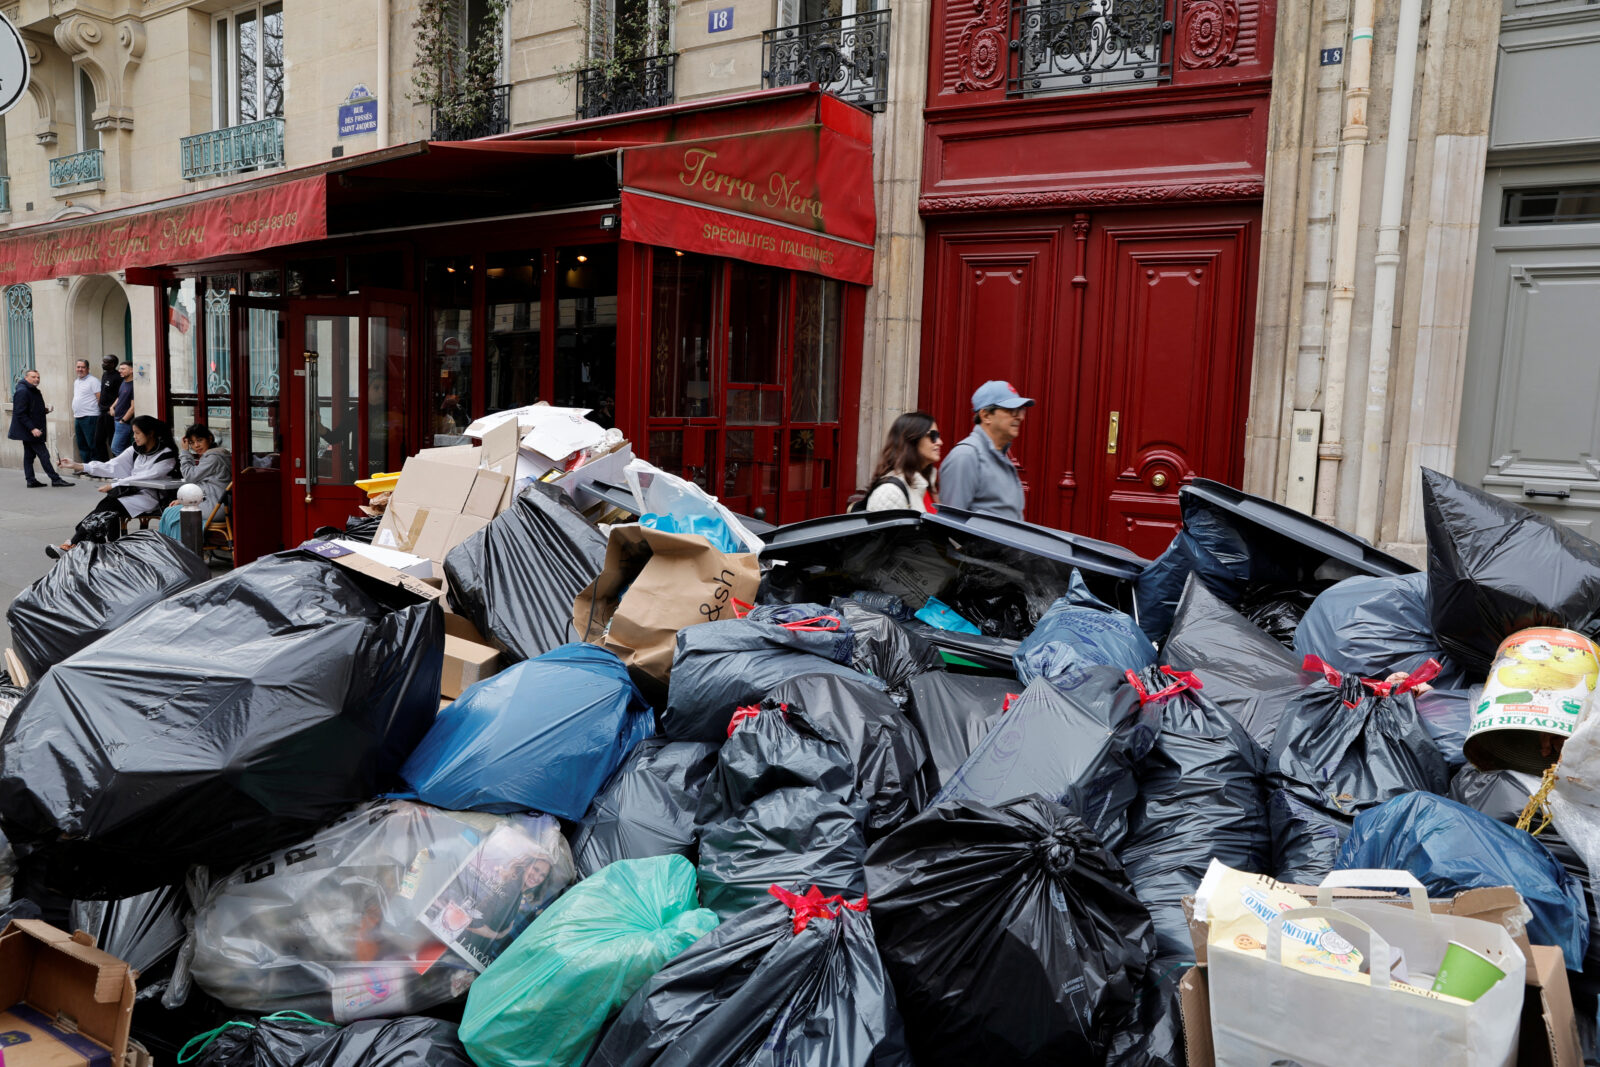 Garbage piles up as workers strike continues over pension reform in Paris